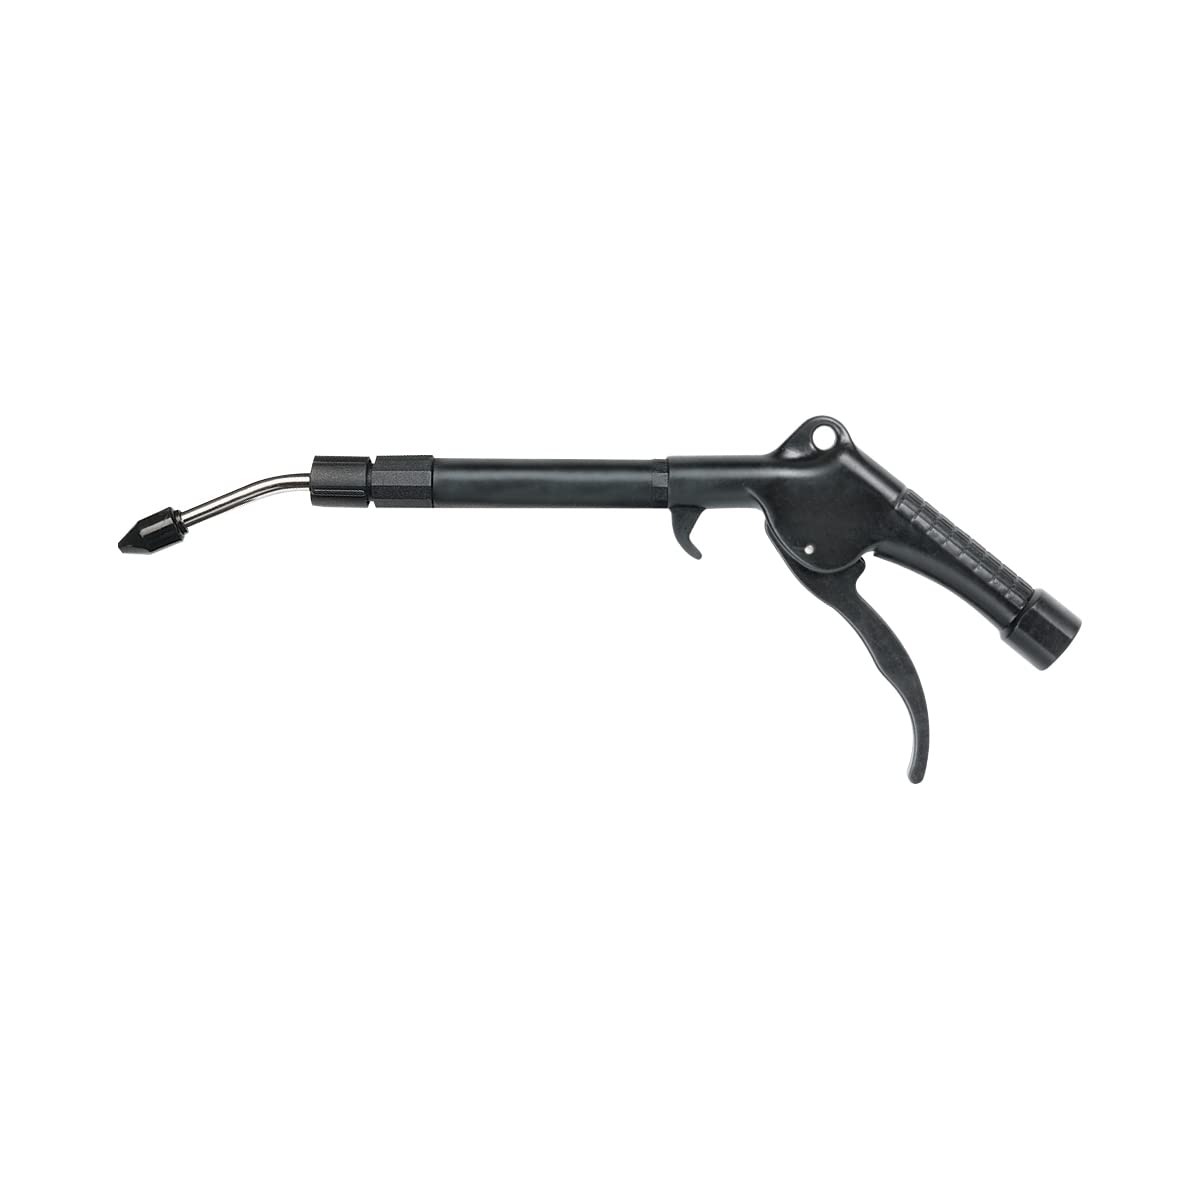 Workforce Blow Gun with 360° Rotating, Adjustable Length Extension - AG2-10 $2.22 Amazon